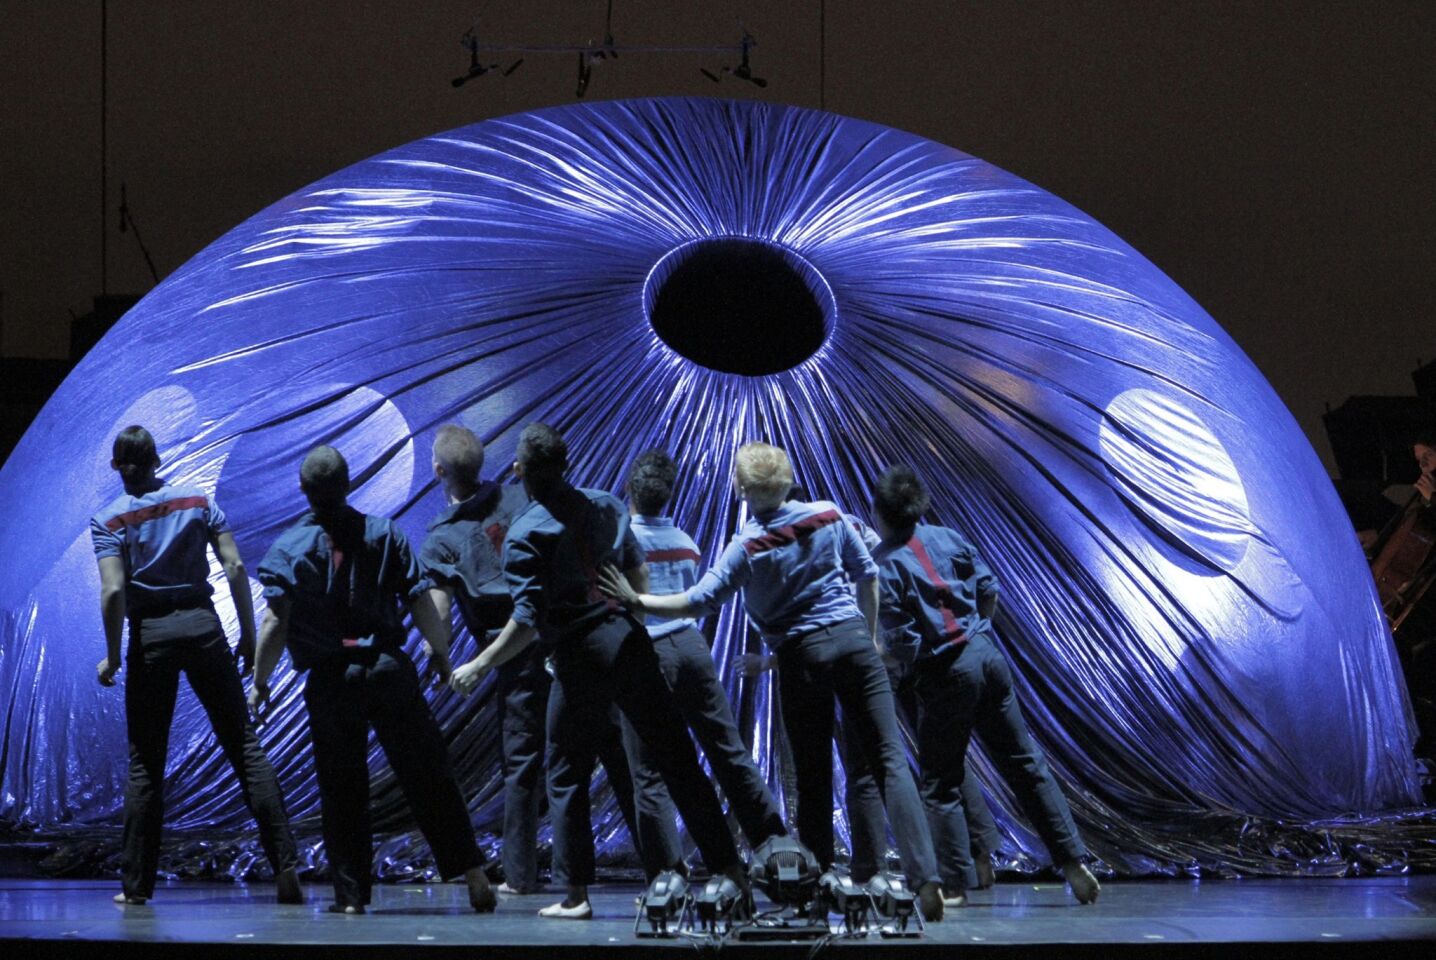 A group of male dancers tilt to their left as the circular centerpiece is covered in a plum colored fabric.